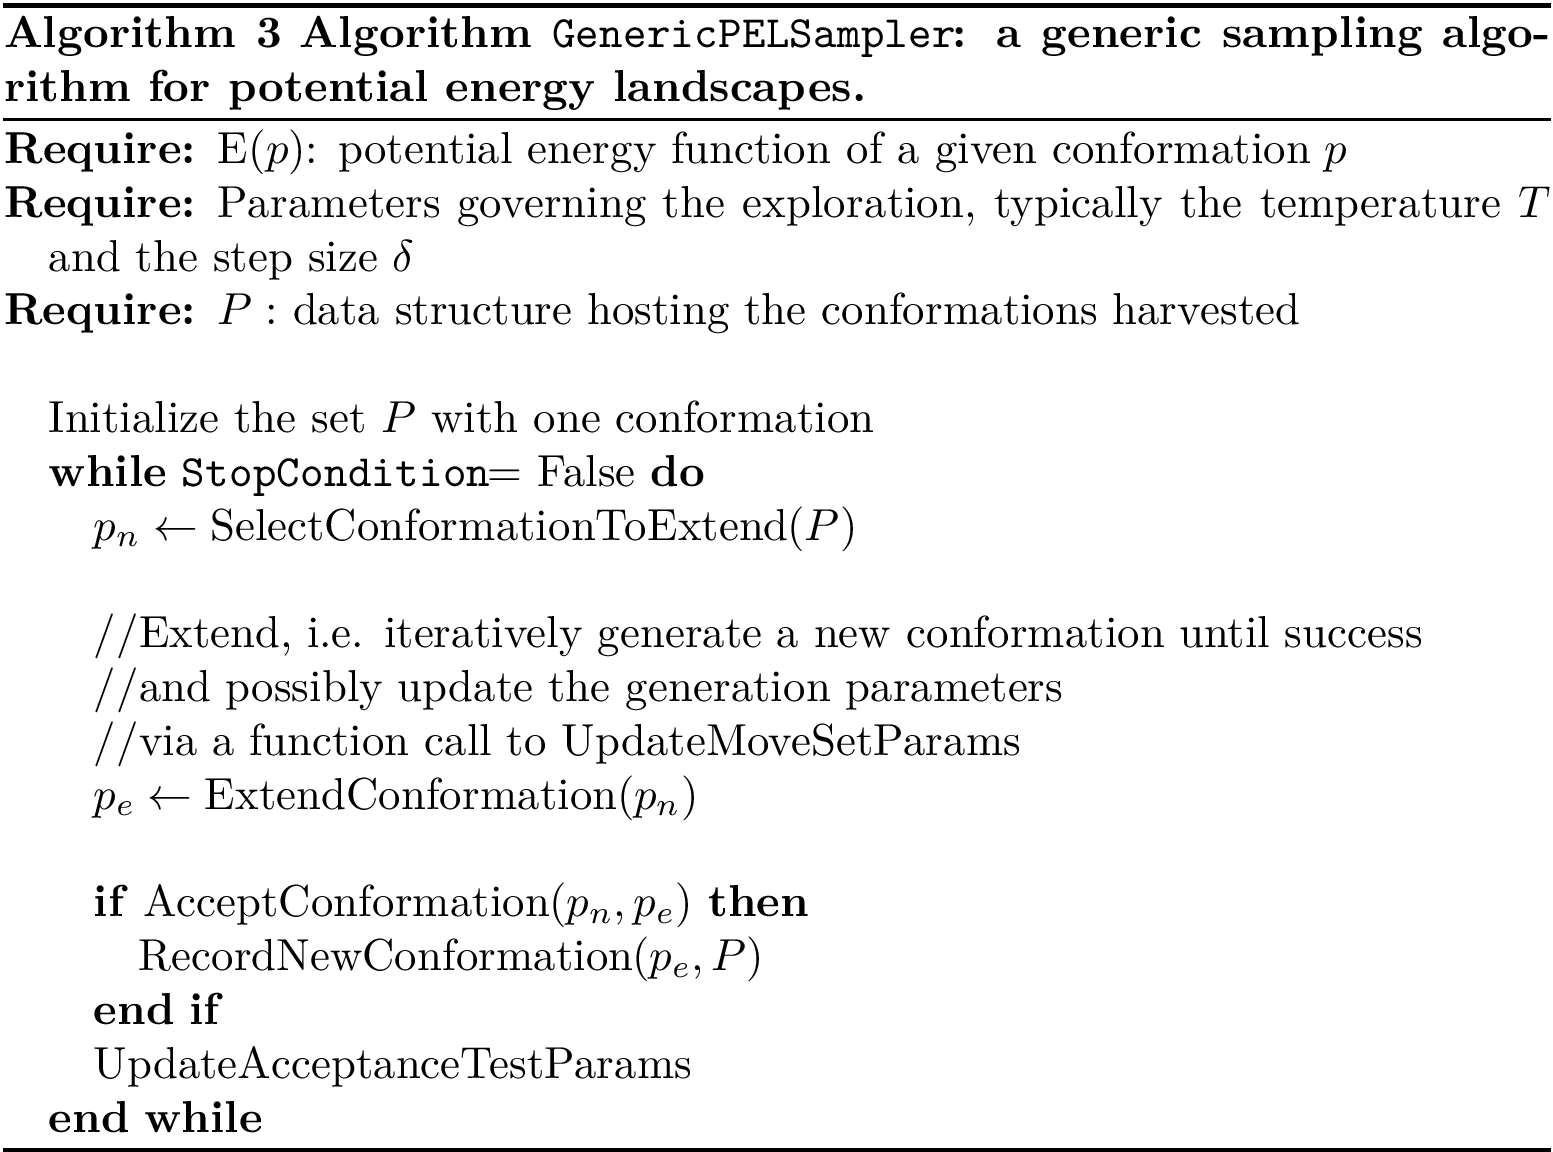 \begin{algorithm} \begin{algorithmic} \REQUIRE{$\energyP{p}$: potential energy function of a given conformation $p$} \REQUIRE{Parameters governing the exploration, typically the temperature $T$ and the step size $\delta$} \REQUIRE{$P:$ data structure hosting the conformations harvested} \STATE{} \STATE{Initialize the set $P$ with one conformation} \WHILE{\stopCond = False} \STATE{$p_{n} \leftarrow \selectConf{P}$} \STATE{} \STATE{//Extend, i.e. iteratively generate a new conformation until success} \STATE{//and possibly update the generation parameters} \STATE{//via a function call to $\updateMoveSetParams$} \STATE{$p_{e}\leftarrow \extendConf{p_{n}}$} \STATE{} \IF{$\acceptConf{p_{n}, p_{e}}$} \STATE{$\recordConf{p_e, P}$} \ENDIF \STATE{$\updateAcceptParams$} \ENDWHILE \end{algorithmic} \caption{{\bf Algorithm \gensampler: a generic sampling algorithm for potential energy landscapes.}} \end{algorithm}